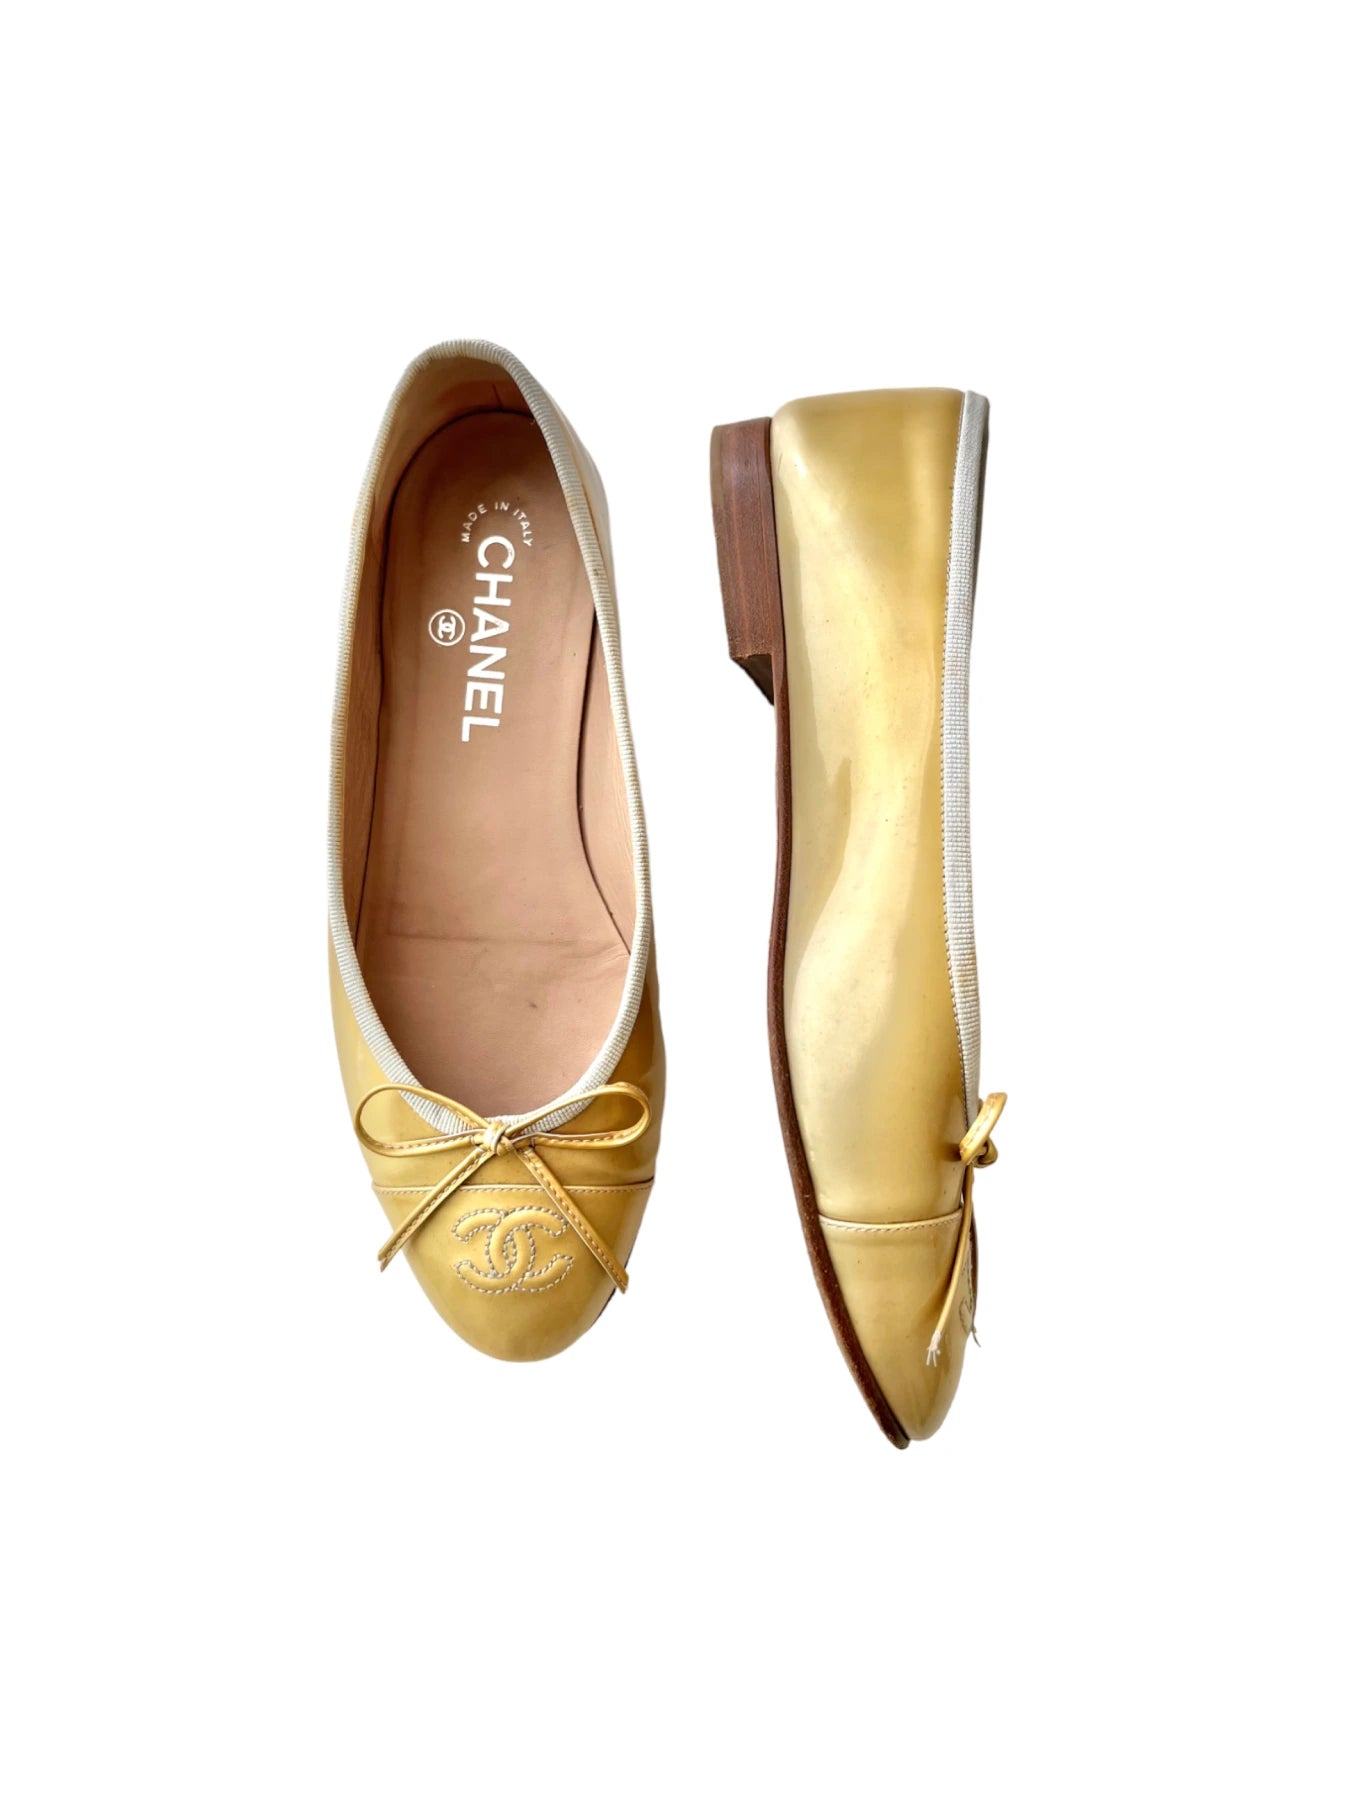 CHANEL CC Ballets Flats Yellow Patent Leather, 37